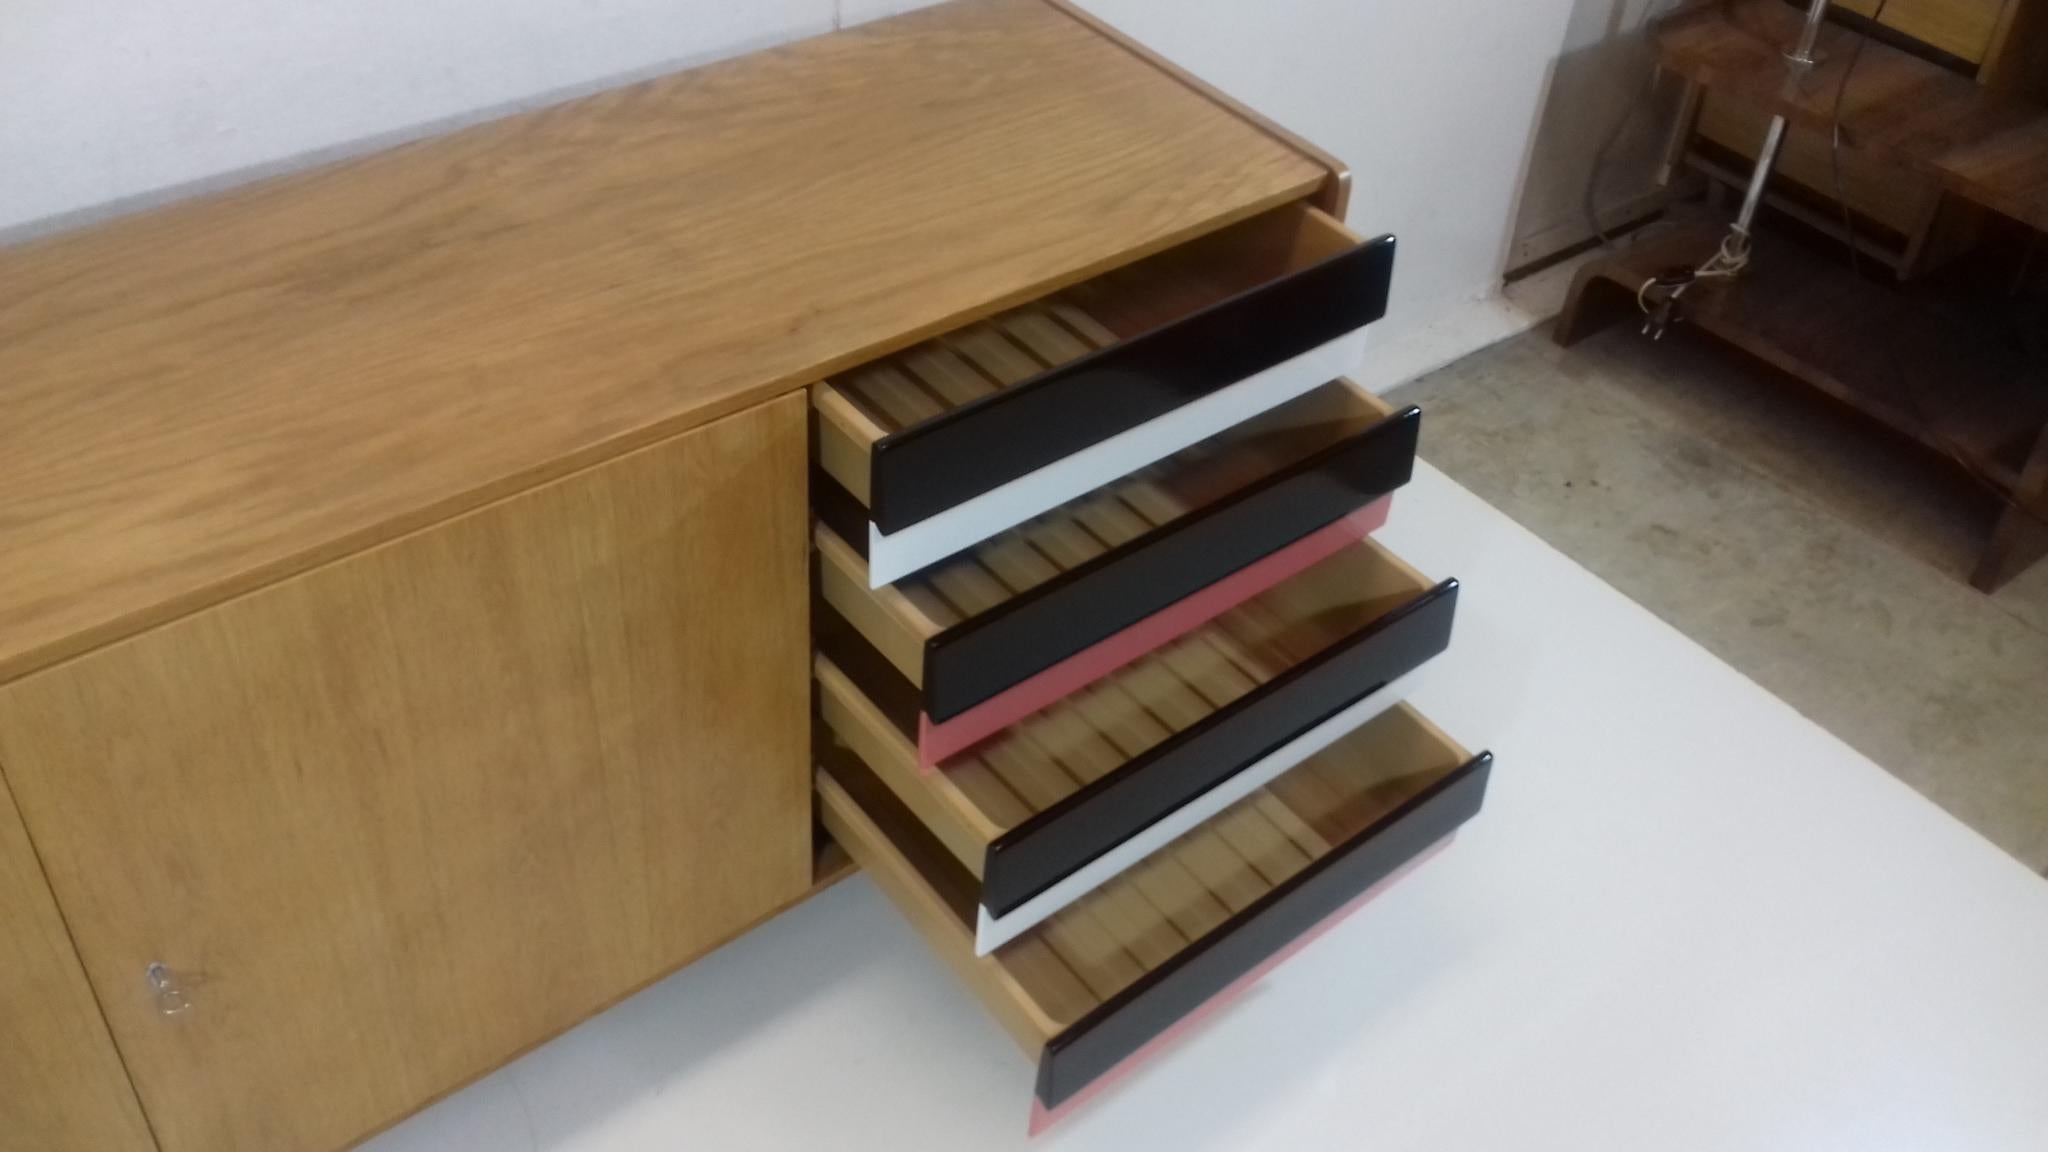 - Made in Czechoslovakia
- Made of oak, plastic
- Four drawers made of plastic
- Completely restored